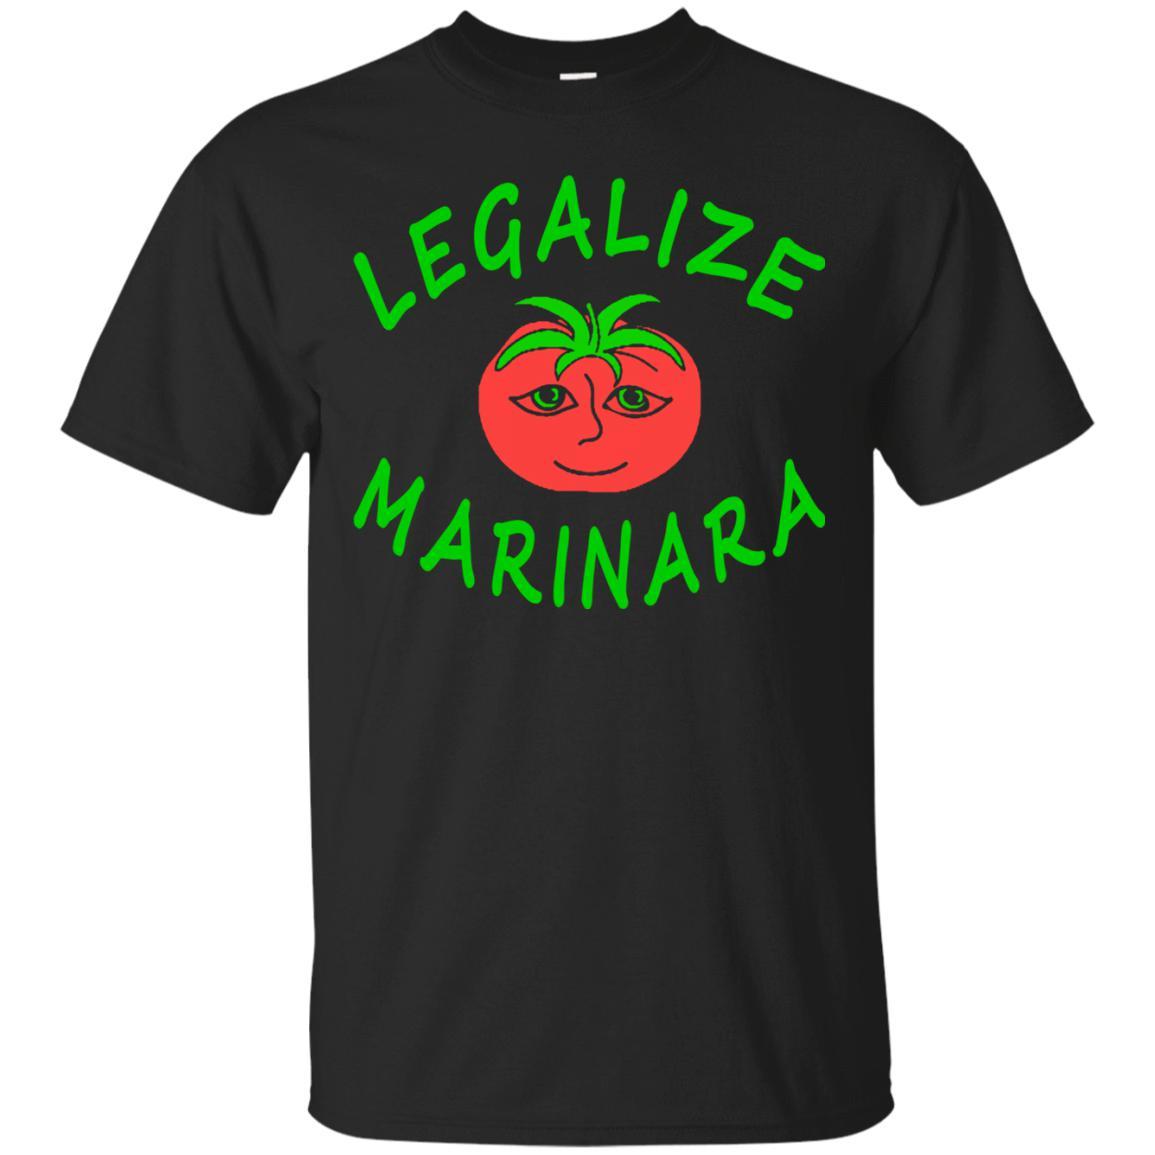 Legalize Marinara Shirts - It Is All You Want